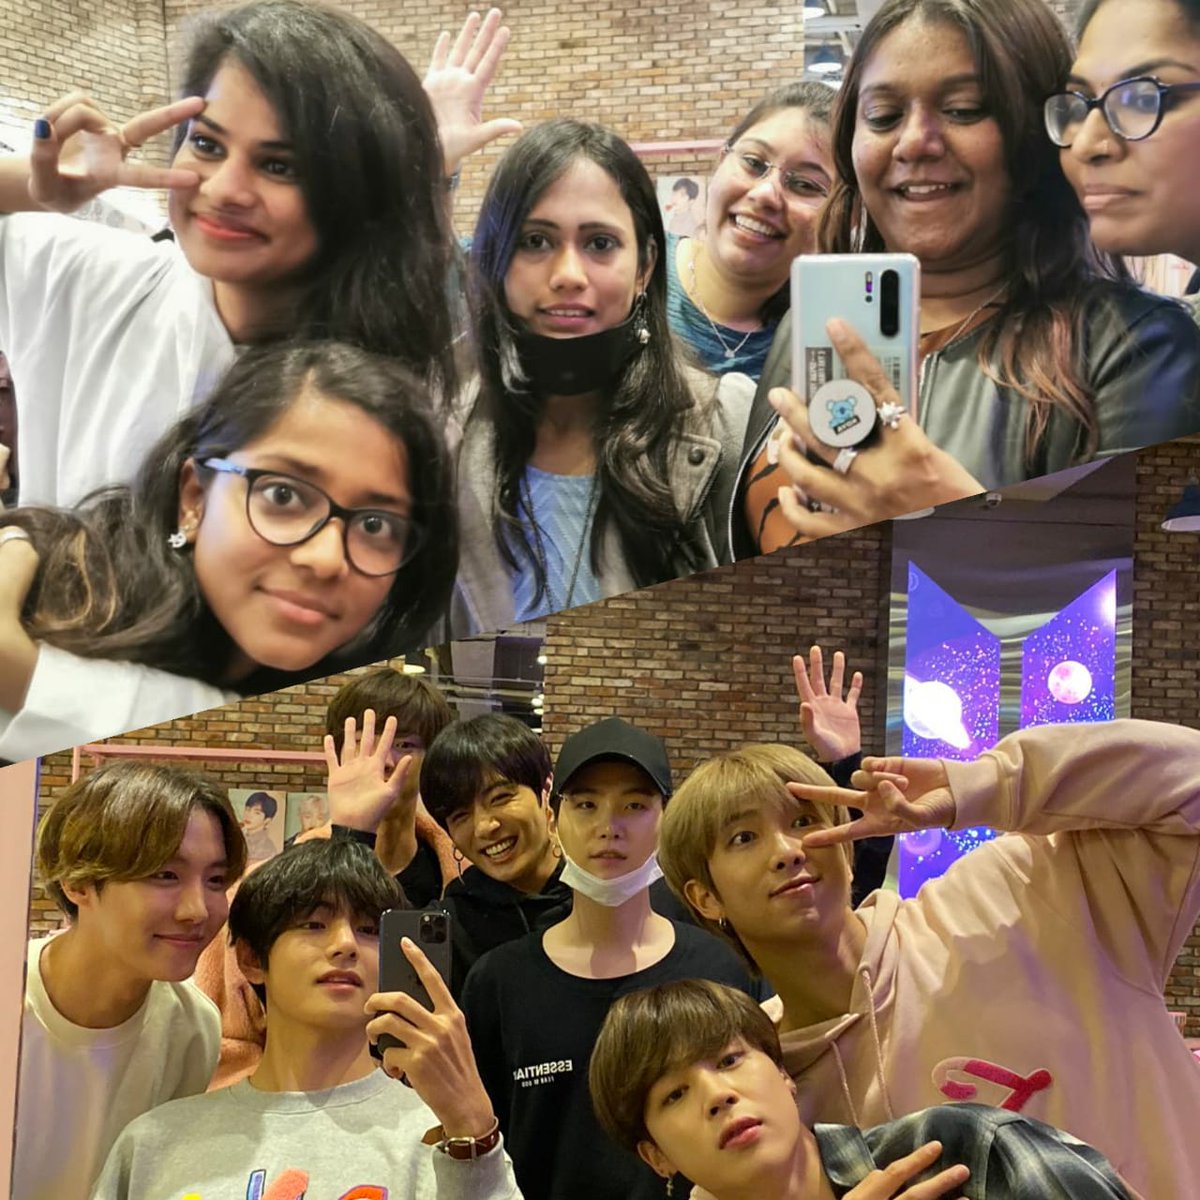 When my Malayali cells told me not to miss the chance  and last but not the least "HOUSE OF BTS" , recreating the same photo and all other tons of fun. +